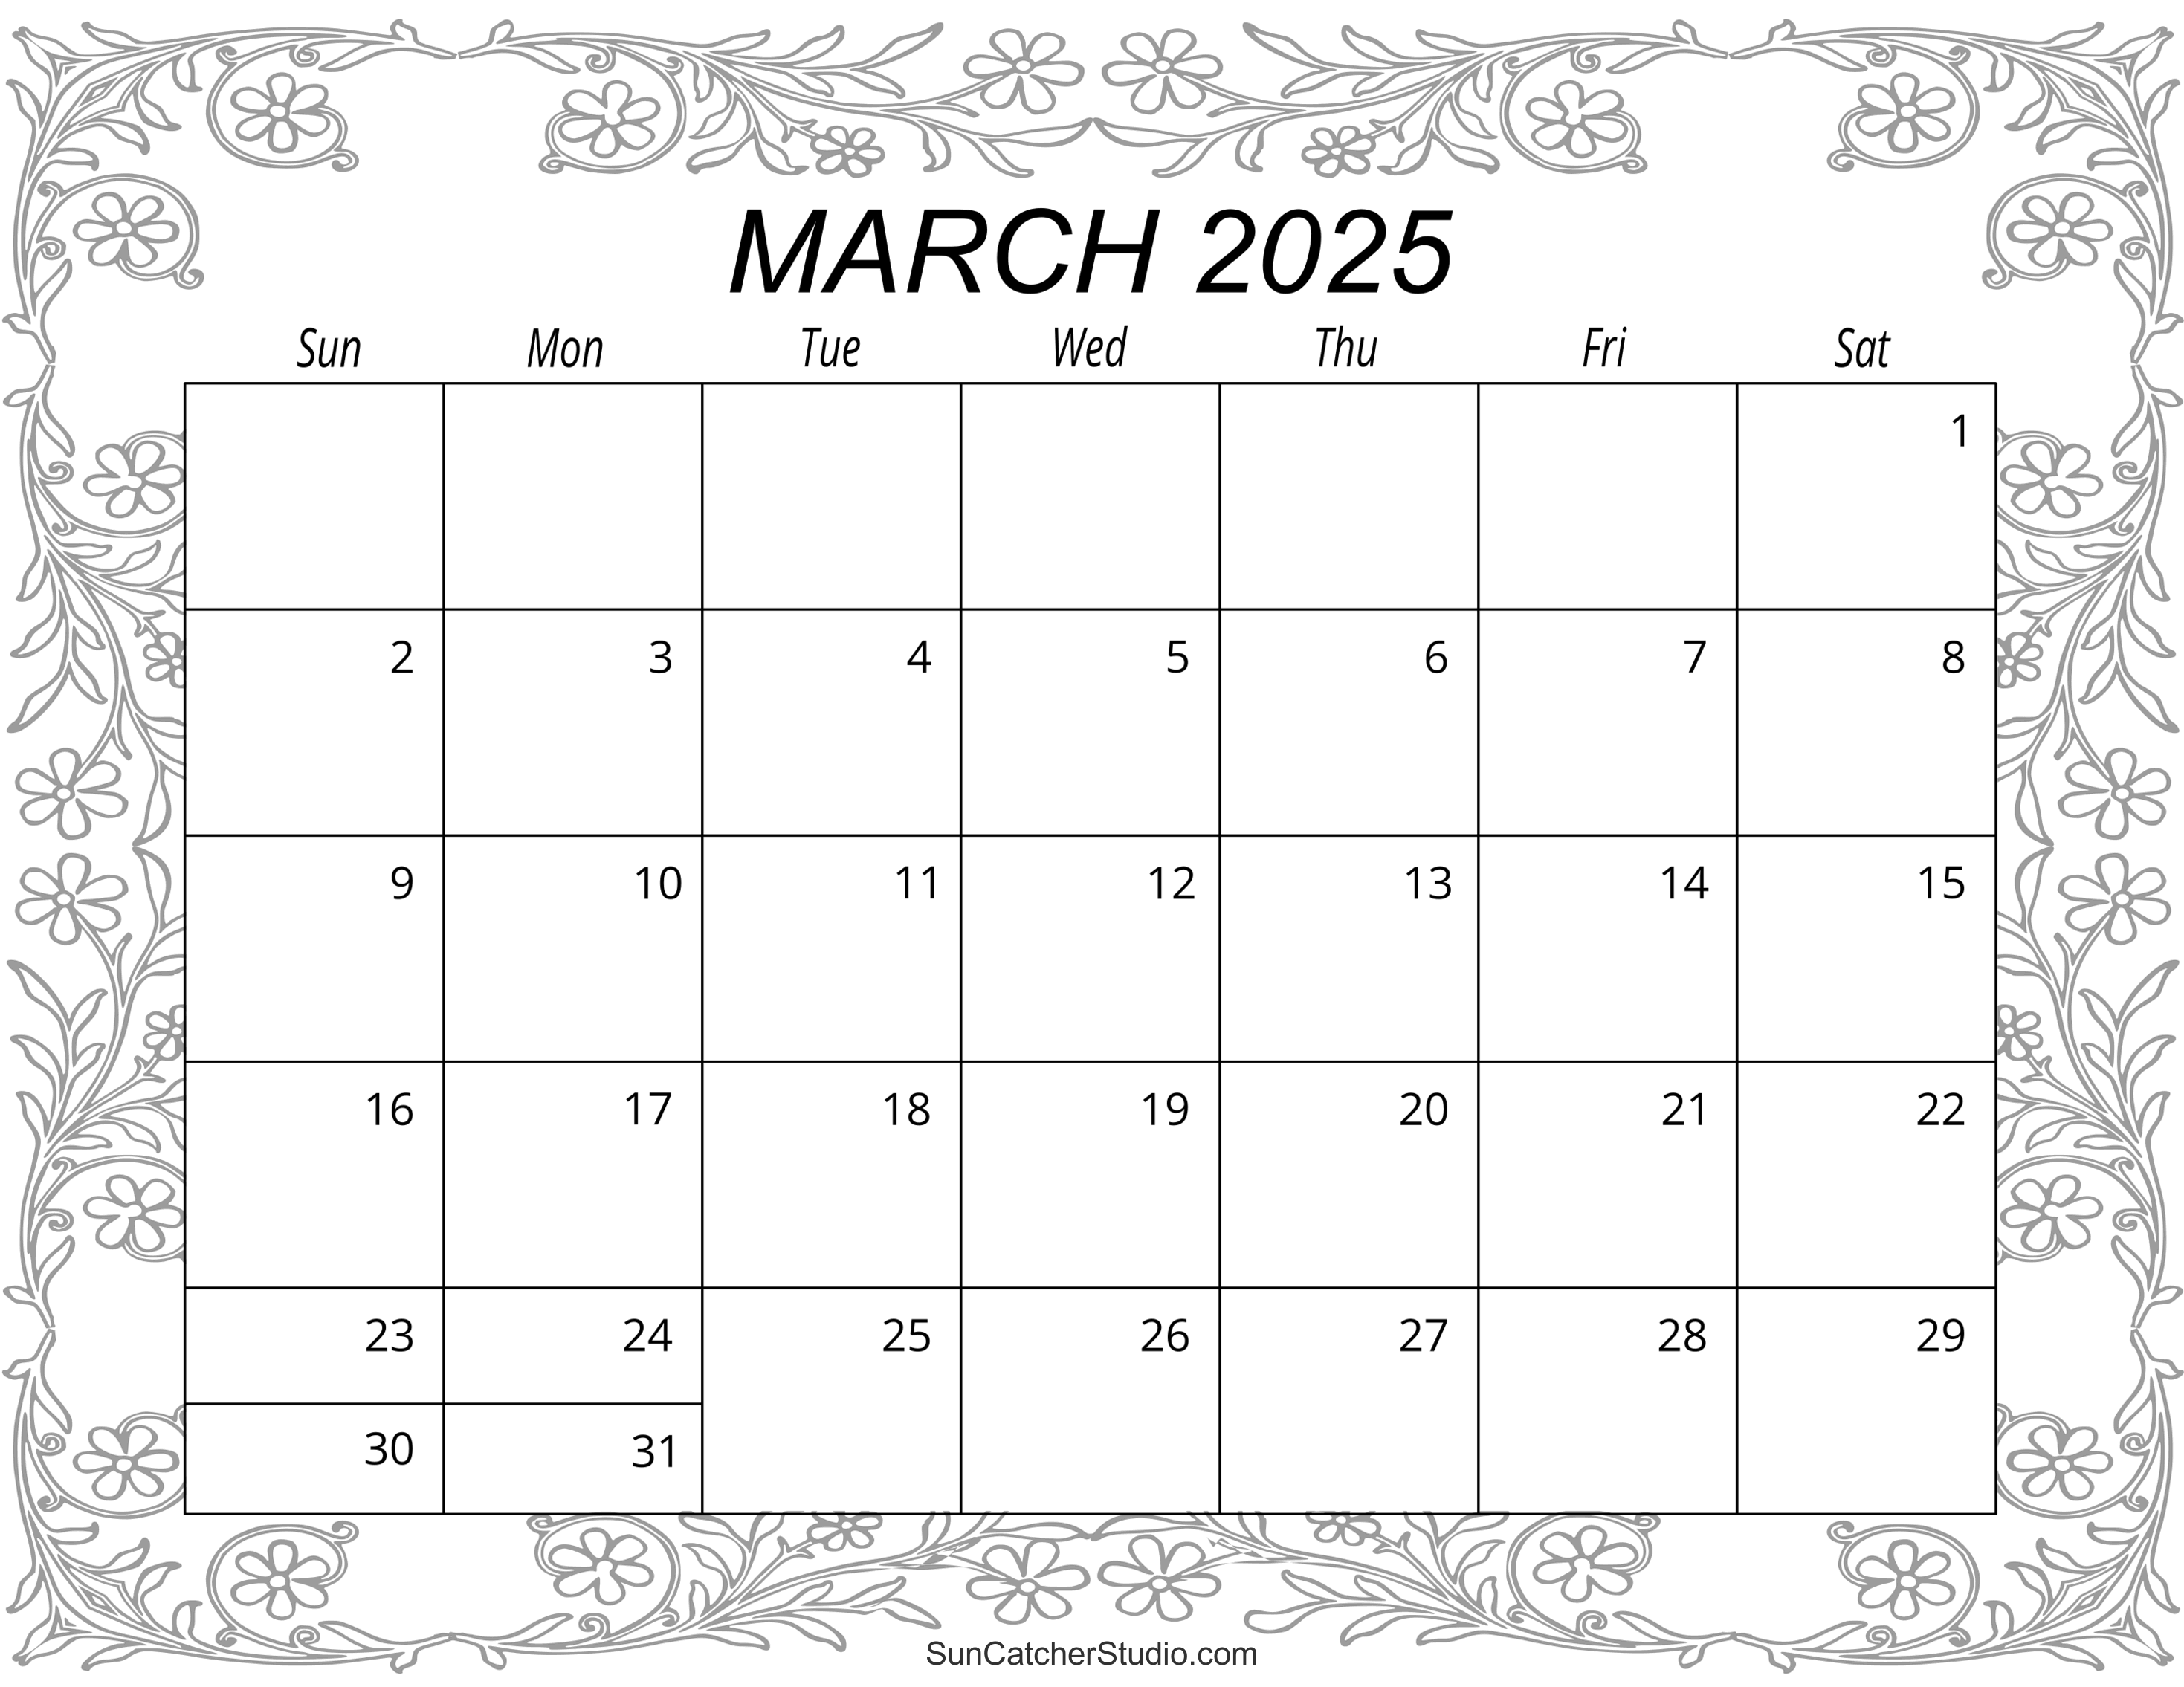 march-2025-calendar-free-printable-diy-projects-patterns